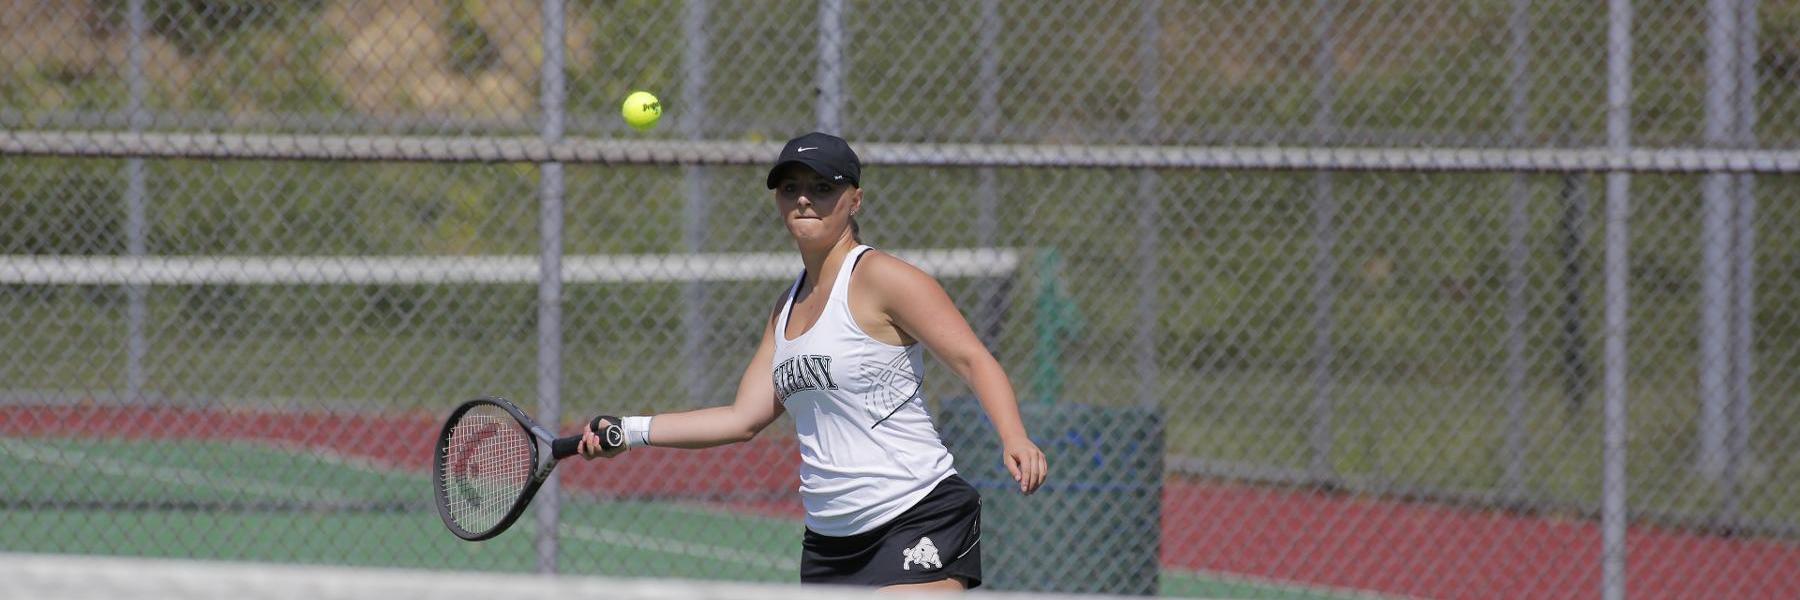 Bethany Tennis Unable to Overcome Early Deficit